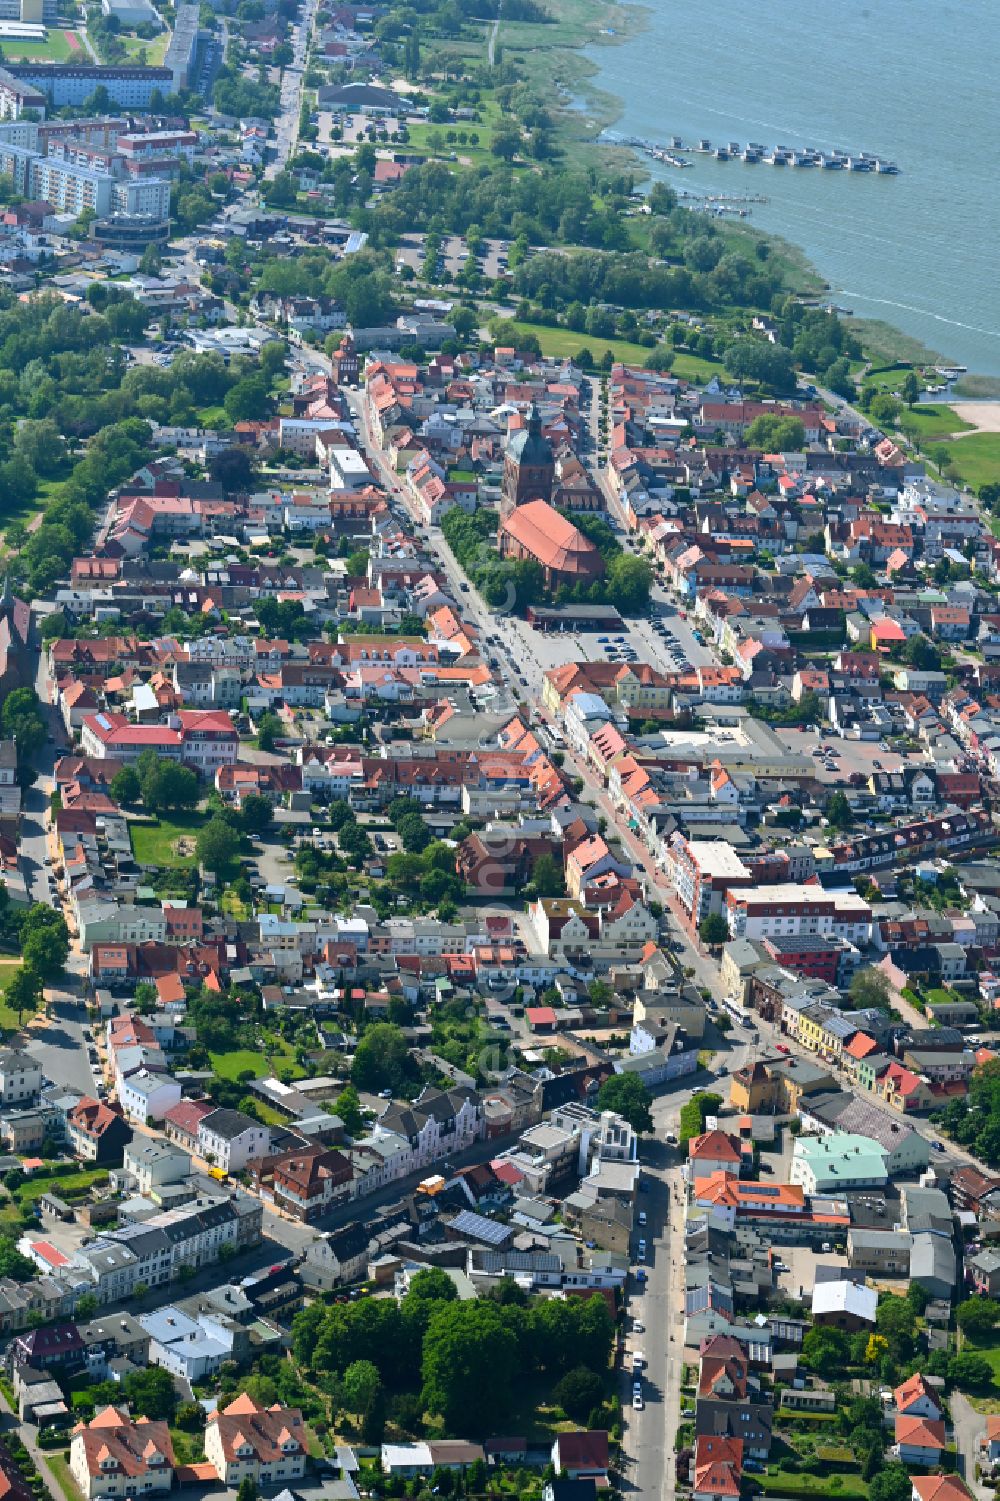 Ribnitz from above - Old Town area and city center in Ribnitz at the baltic sea coast in the state Mecklenburg - Western Pomerania, Germany